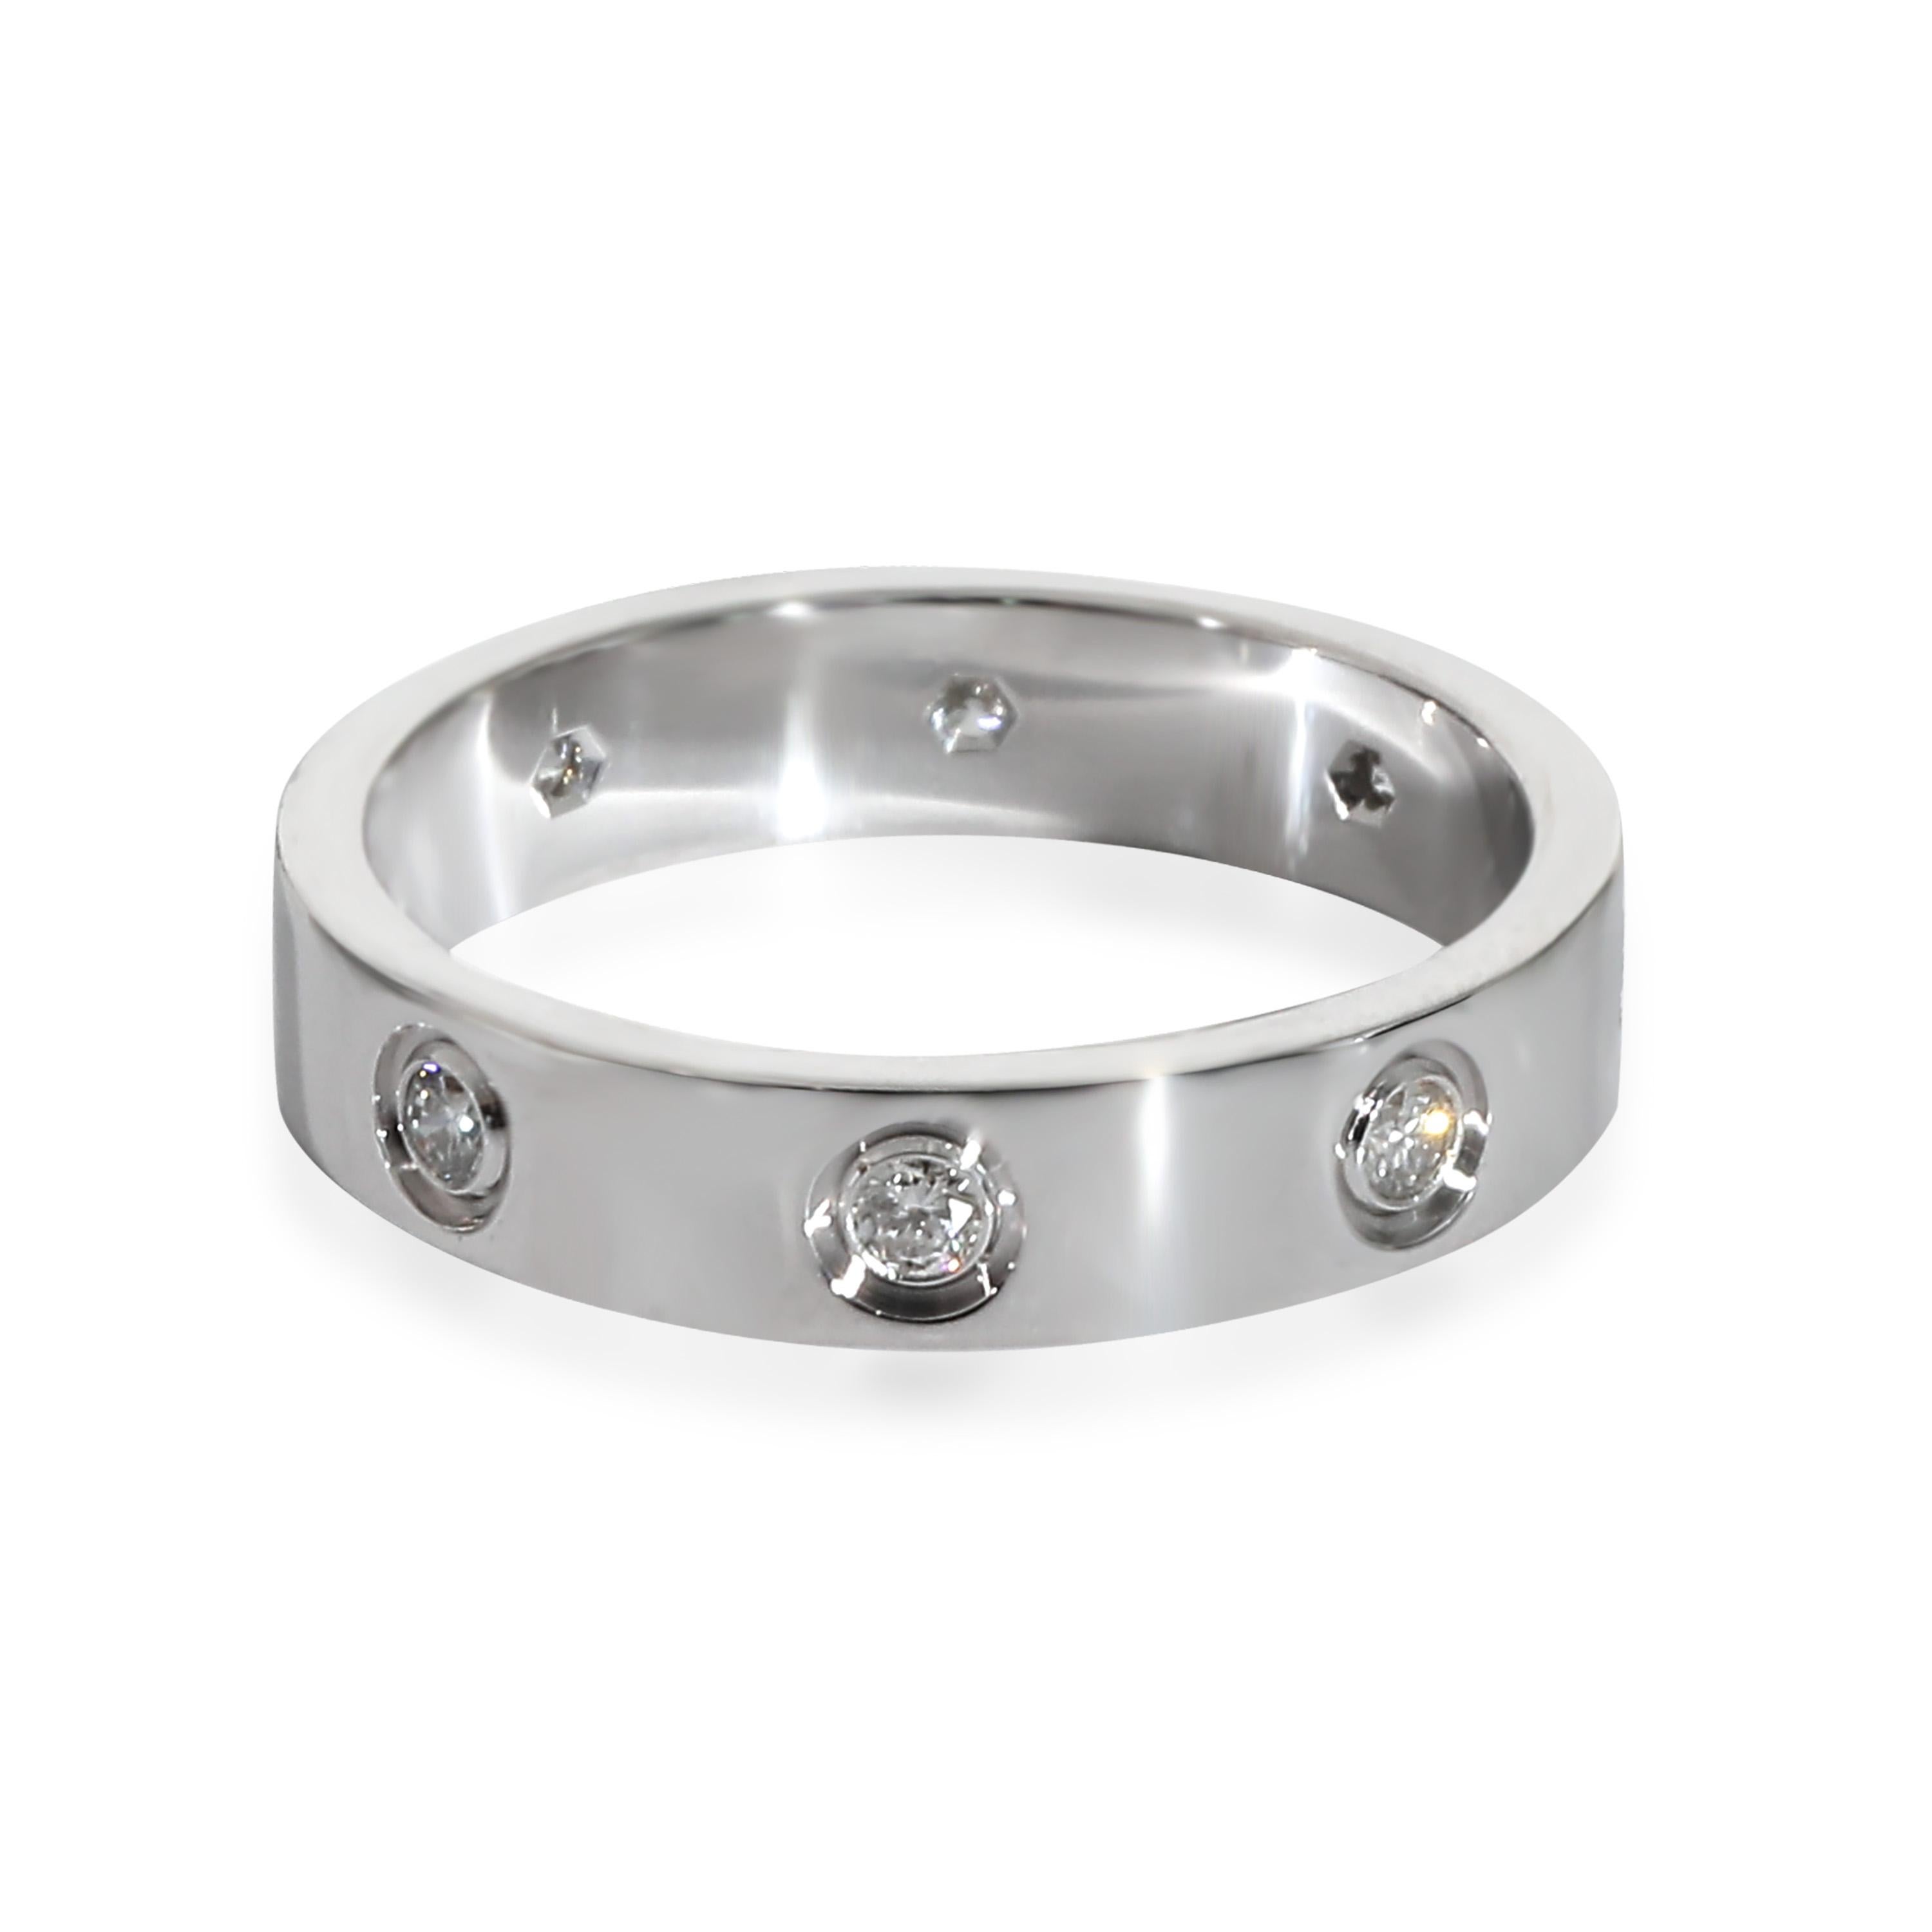 Cartier Love Diamond Wedding Band in 18KT White Gold 0.19 CTW

PRIMARY DETAILS
SKU: 135751
Listing Title: Cartier Love Diamond Wedding Band in 18KT White Gold 0.19 CTW
Condition Description: Cartier's Love collection is the epitome of iconic, from